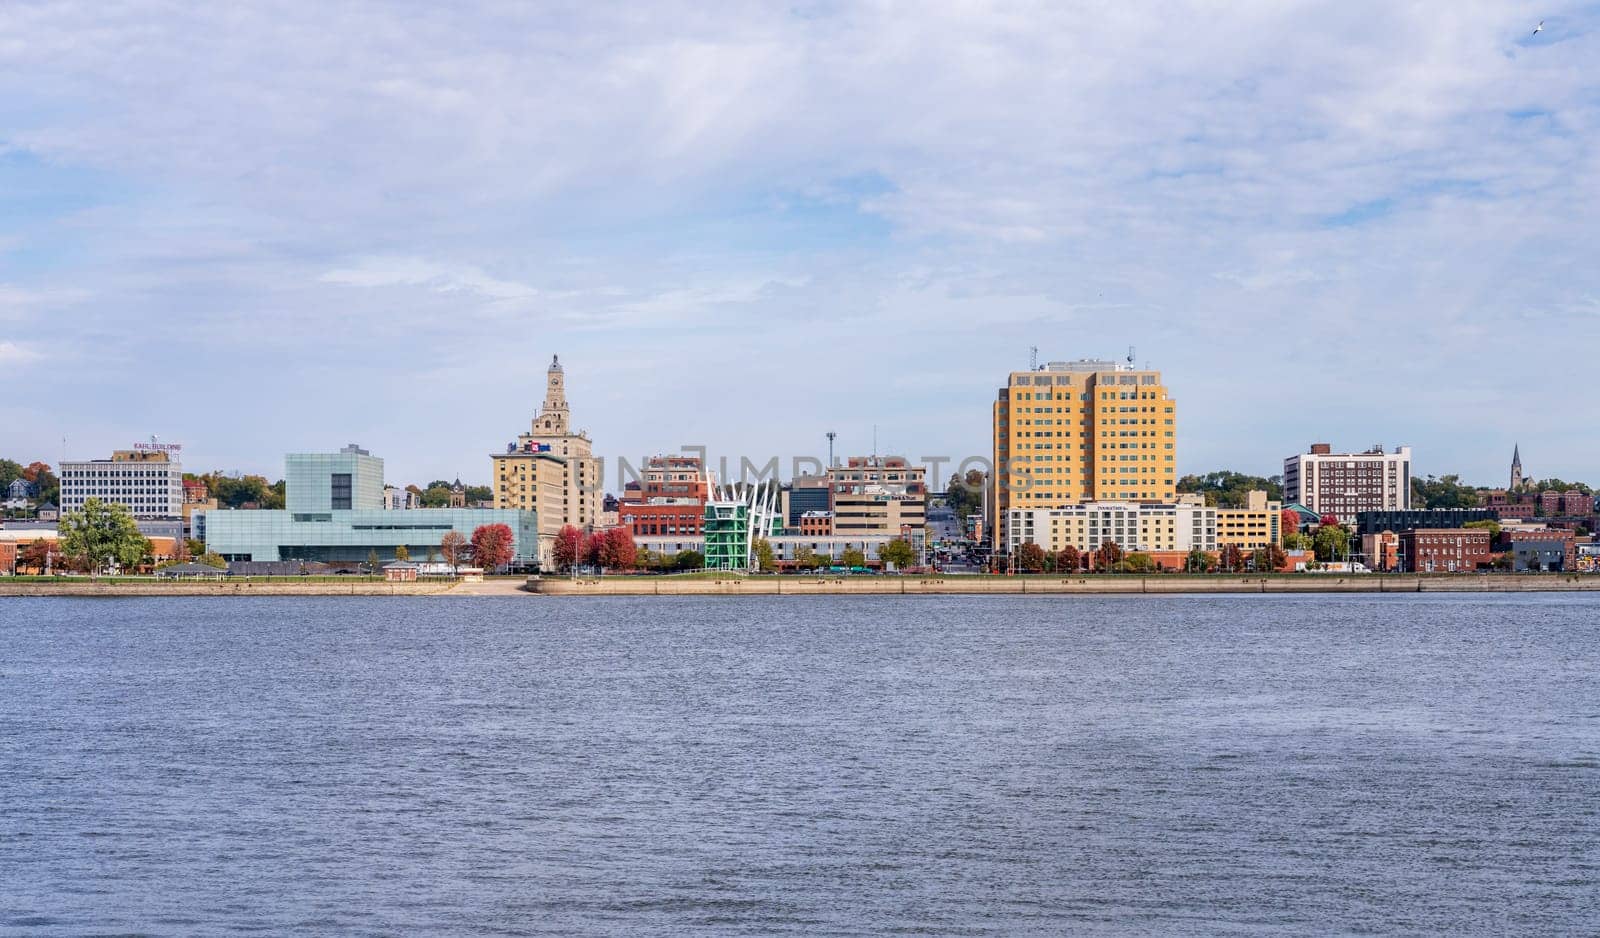 Cityscape of downtown area of Davenport IA by steheap